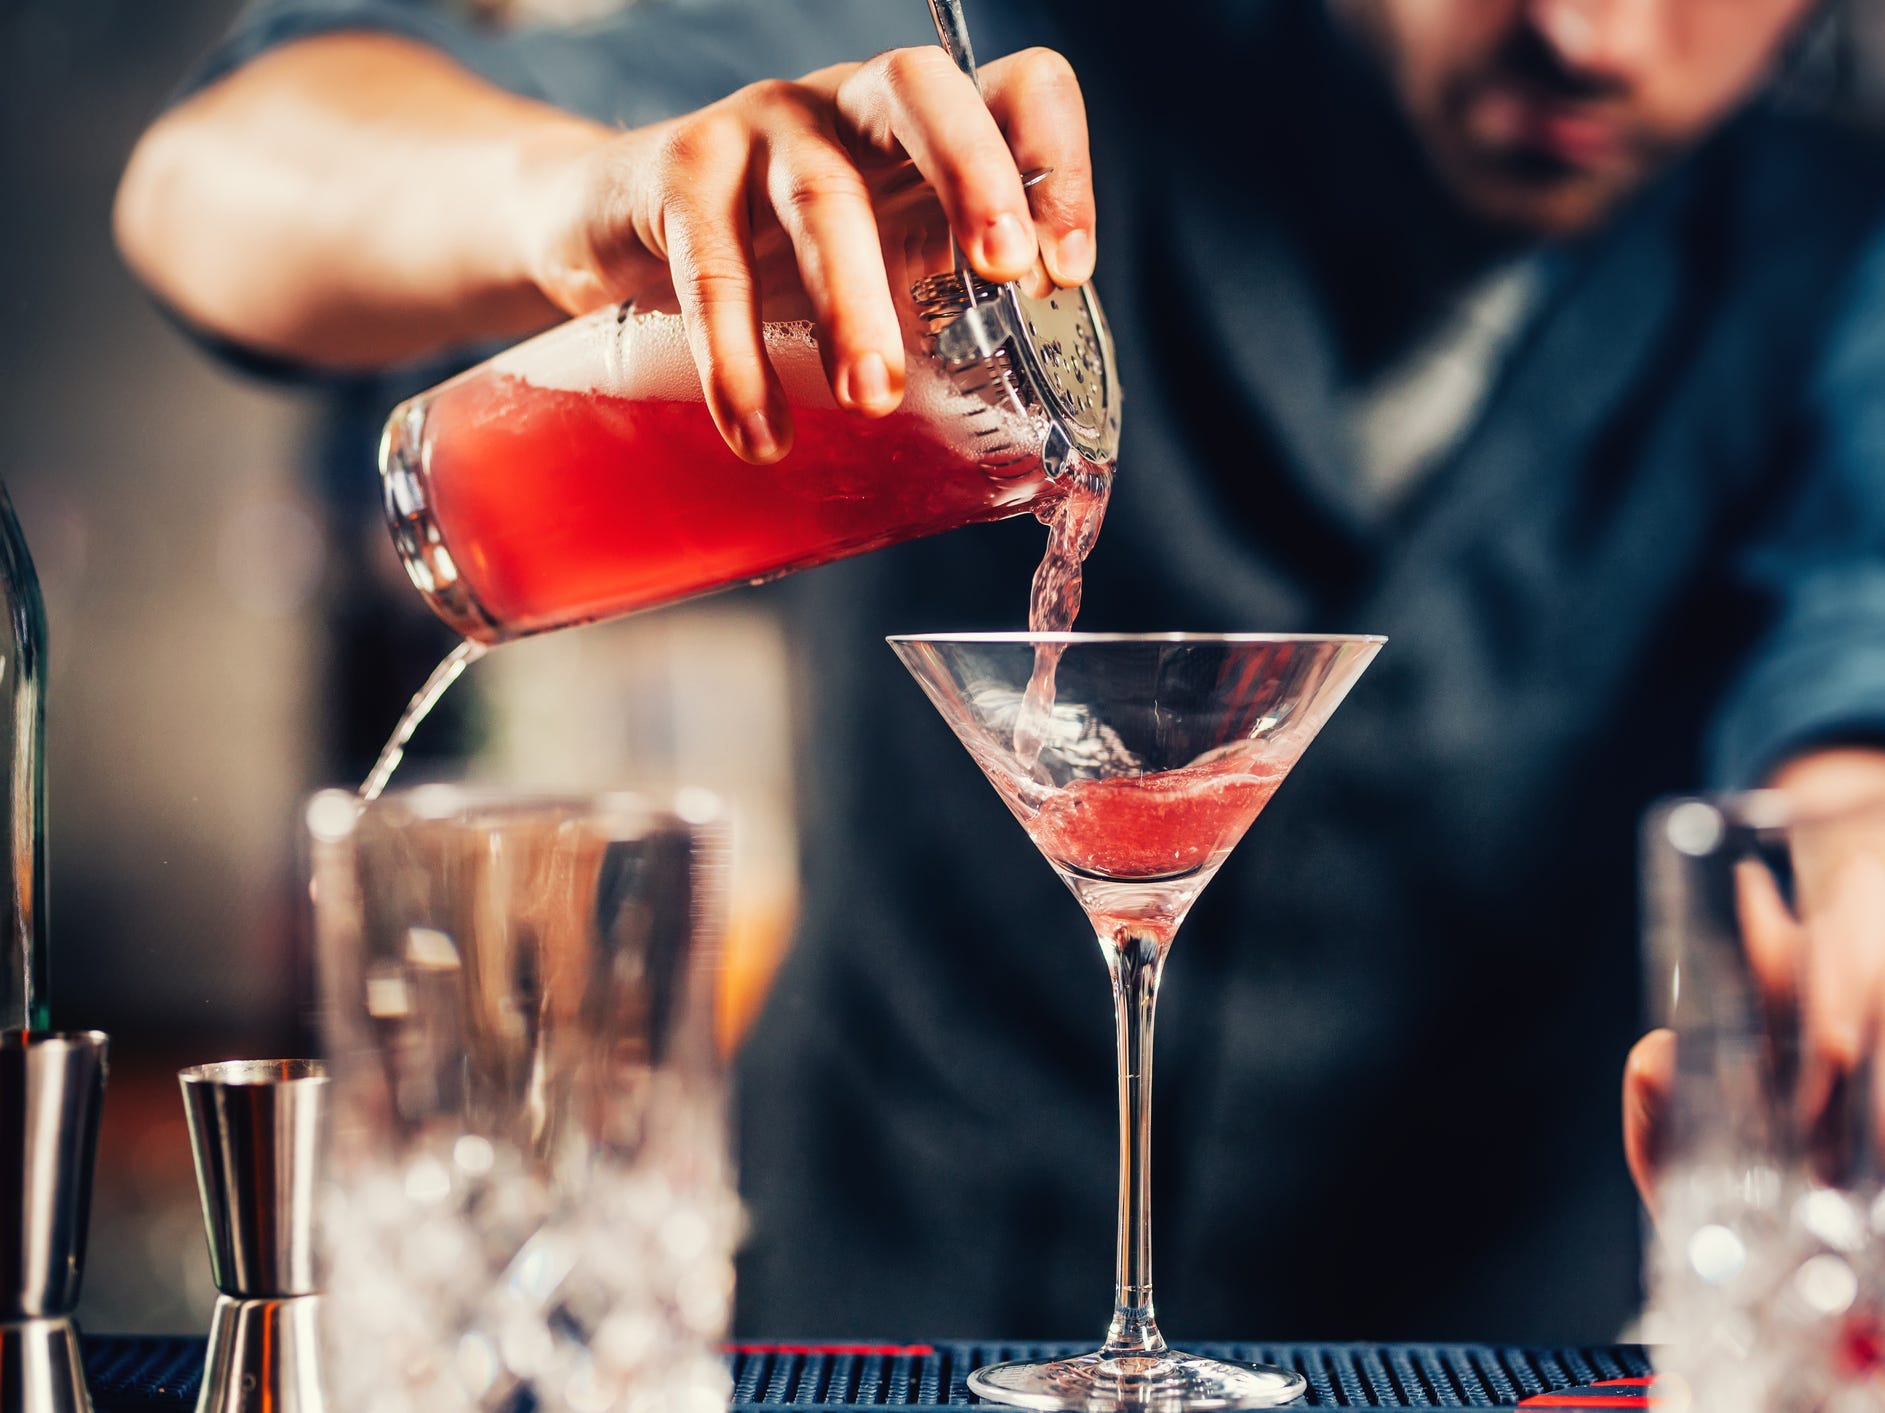 A bartender pouring a cosmopolitan from a shaker into a martini glass